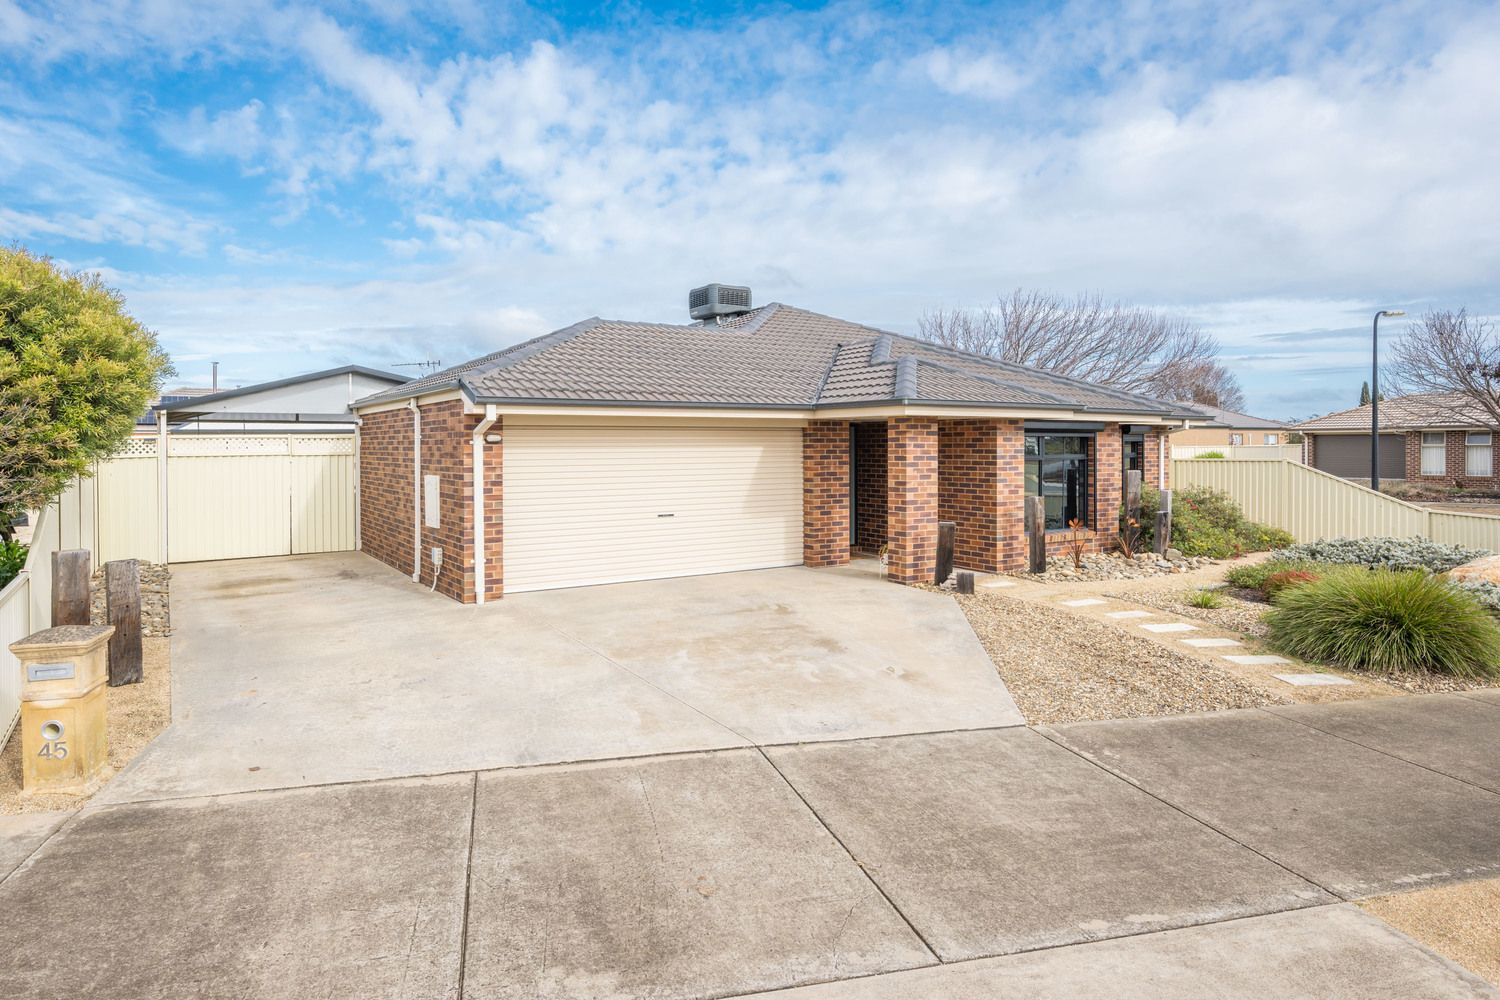 3 bedrooms House in 45 Warrumbungle Drive SHEPPARTON VIC, 3630